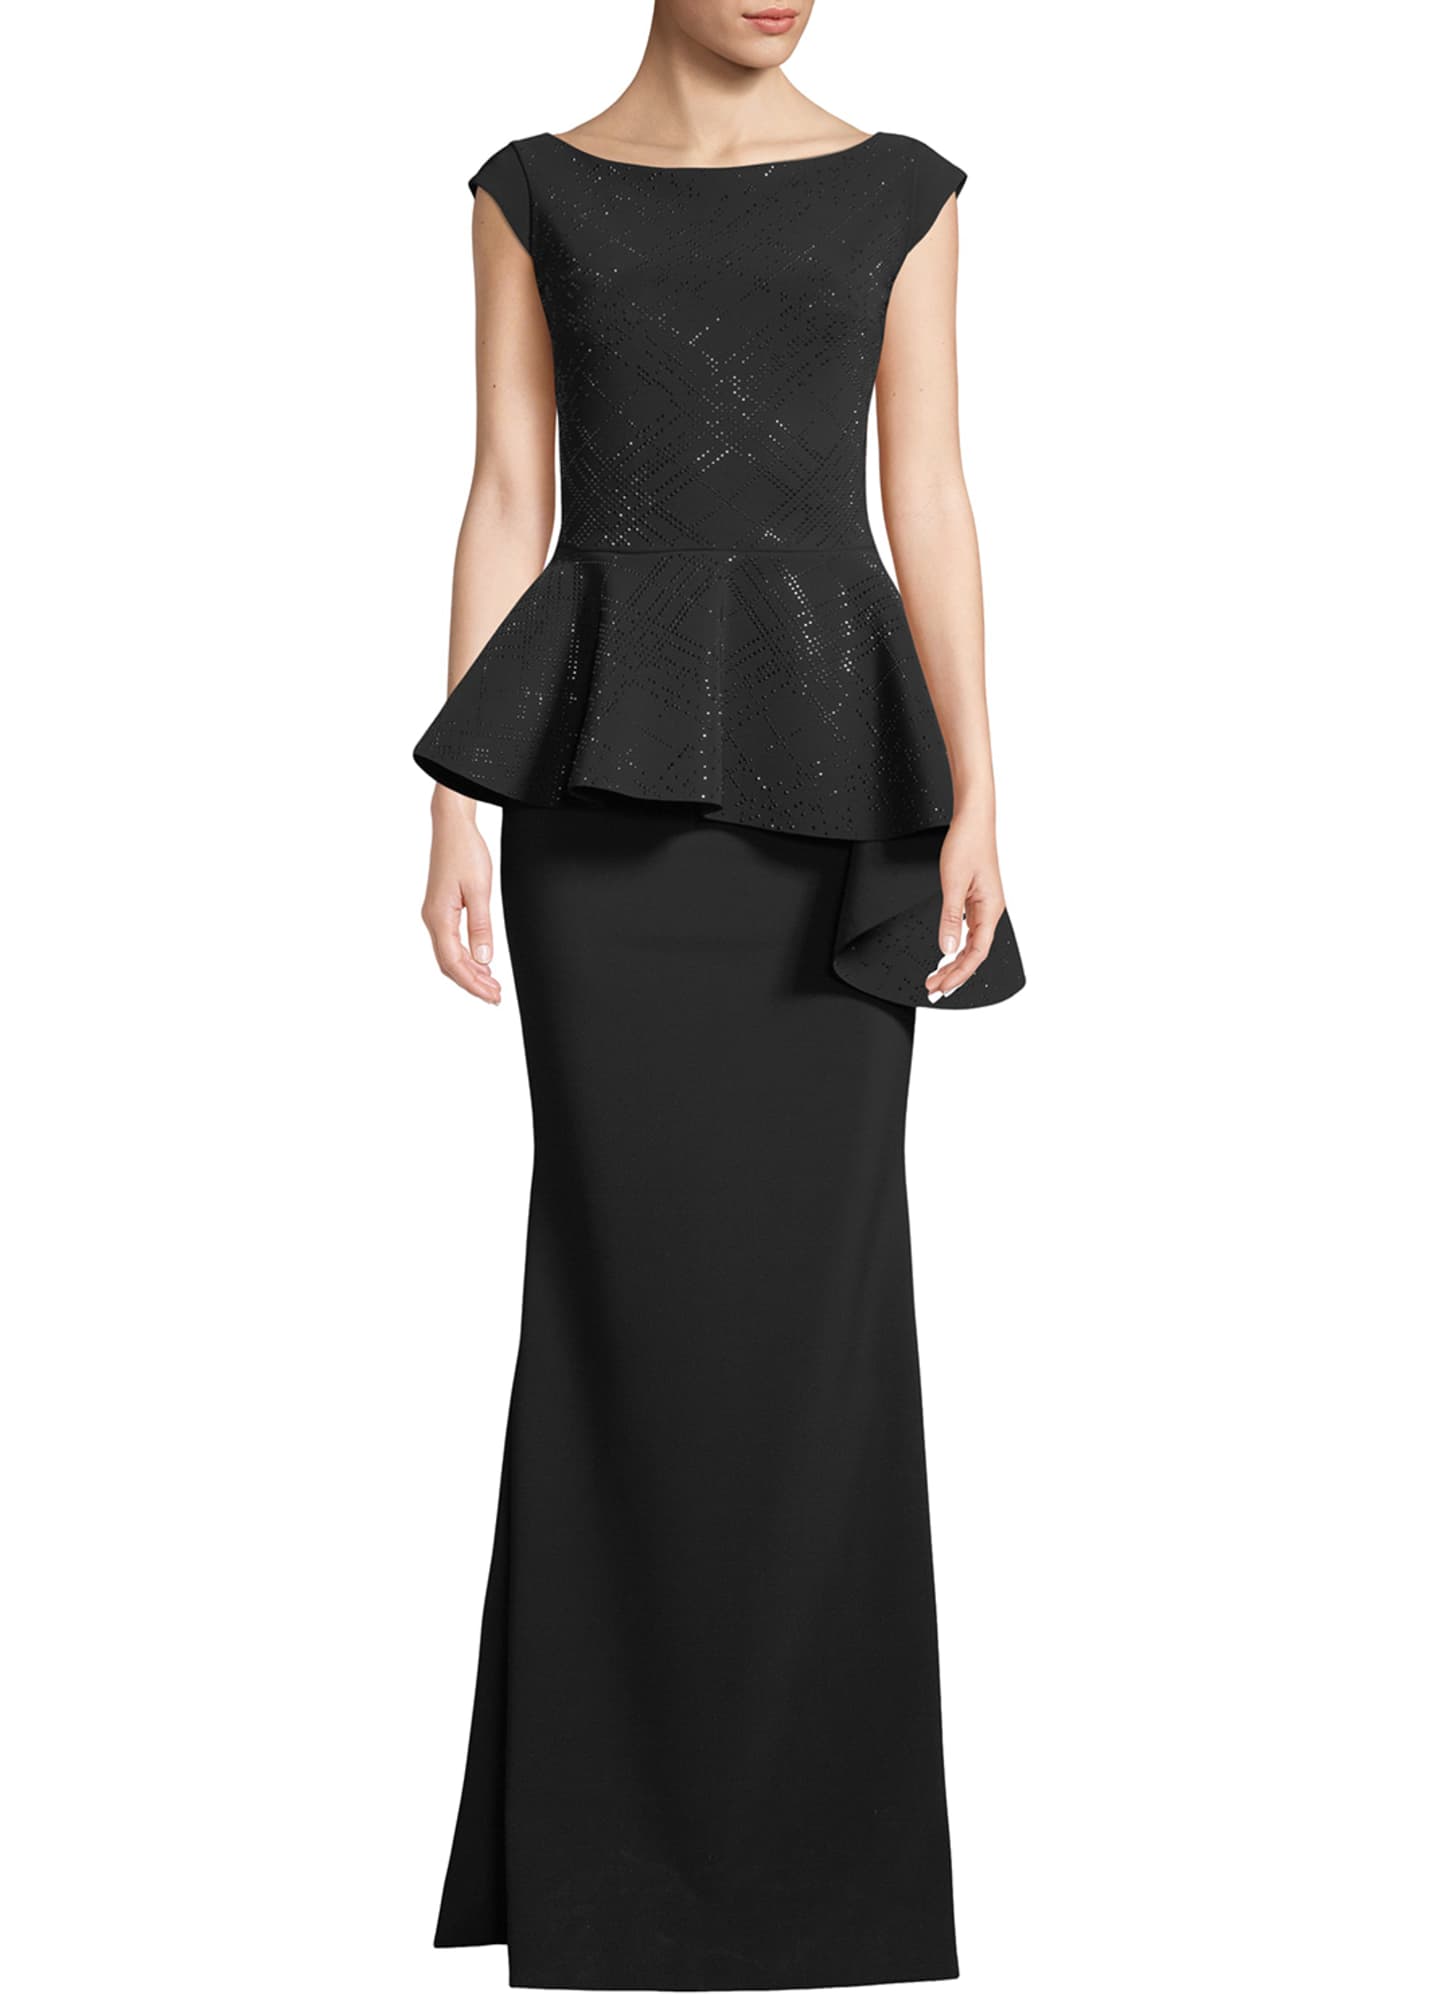 peplum evening gown with sleeves